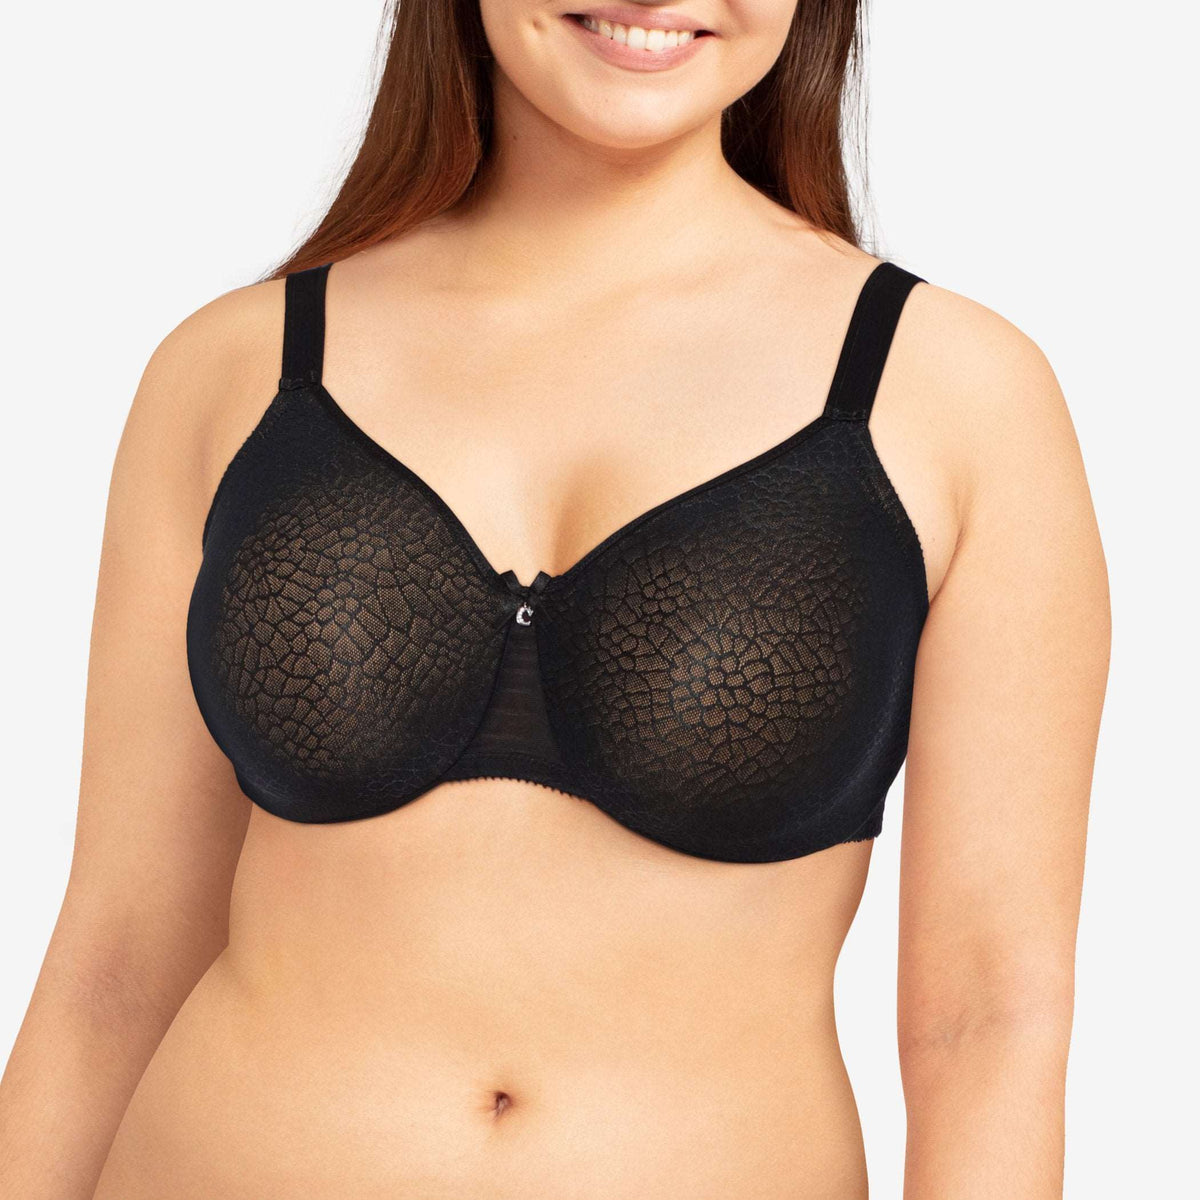 Wholesale sexy minimizer bras - Offering Lingerie For The Curvy Lady 